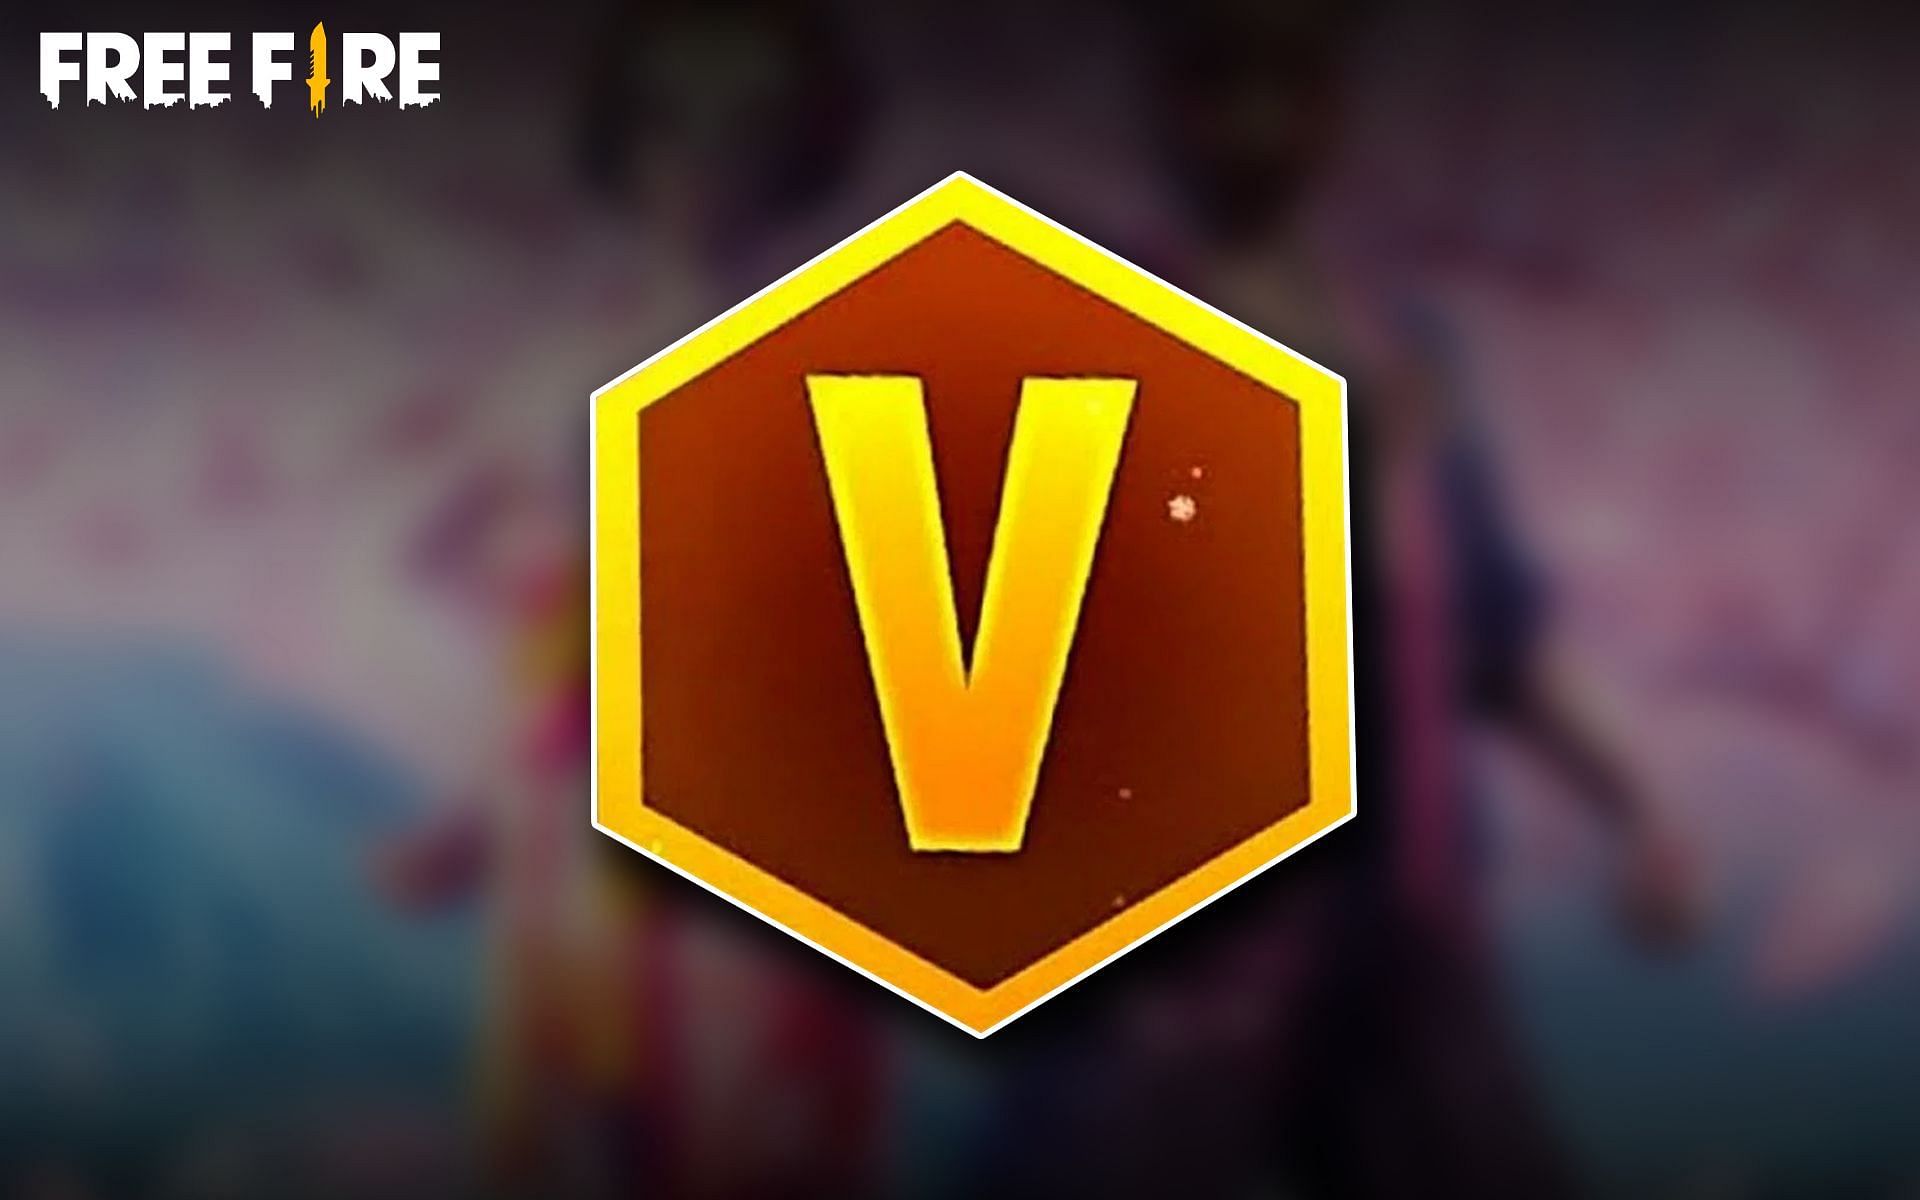 The V Badge can be received by players in Free Fire after joining Partner Program (Image via Sportskeeda)